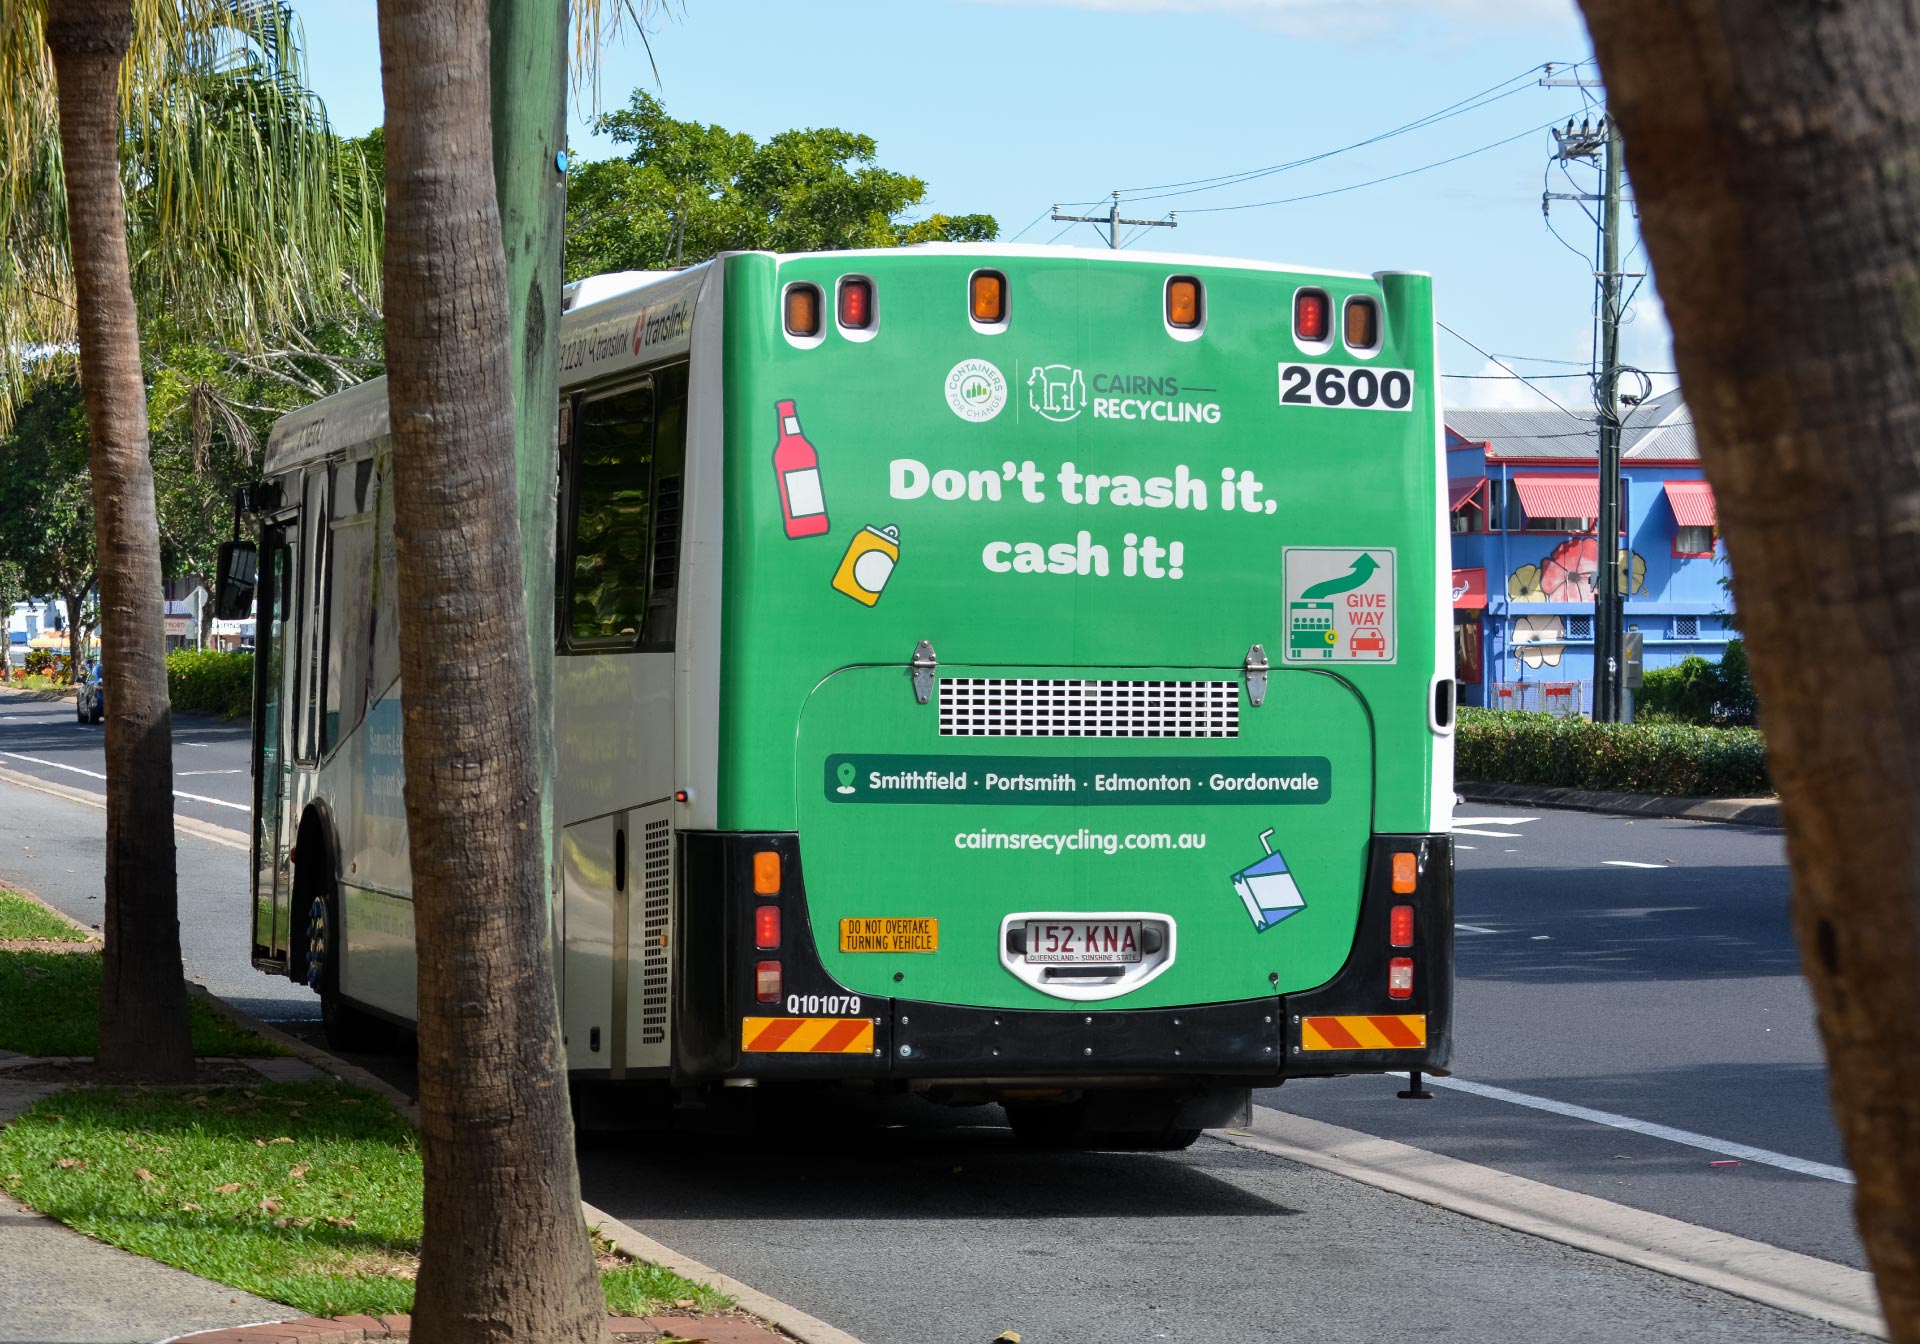 Cairns Recycling outdoor ad on bus